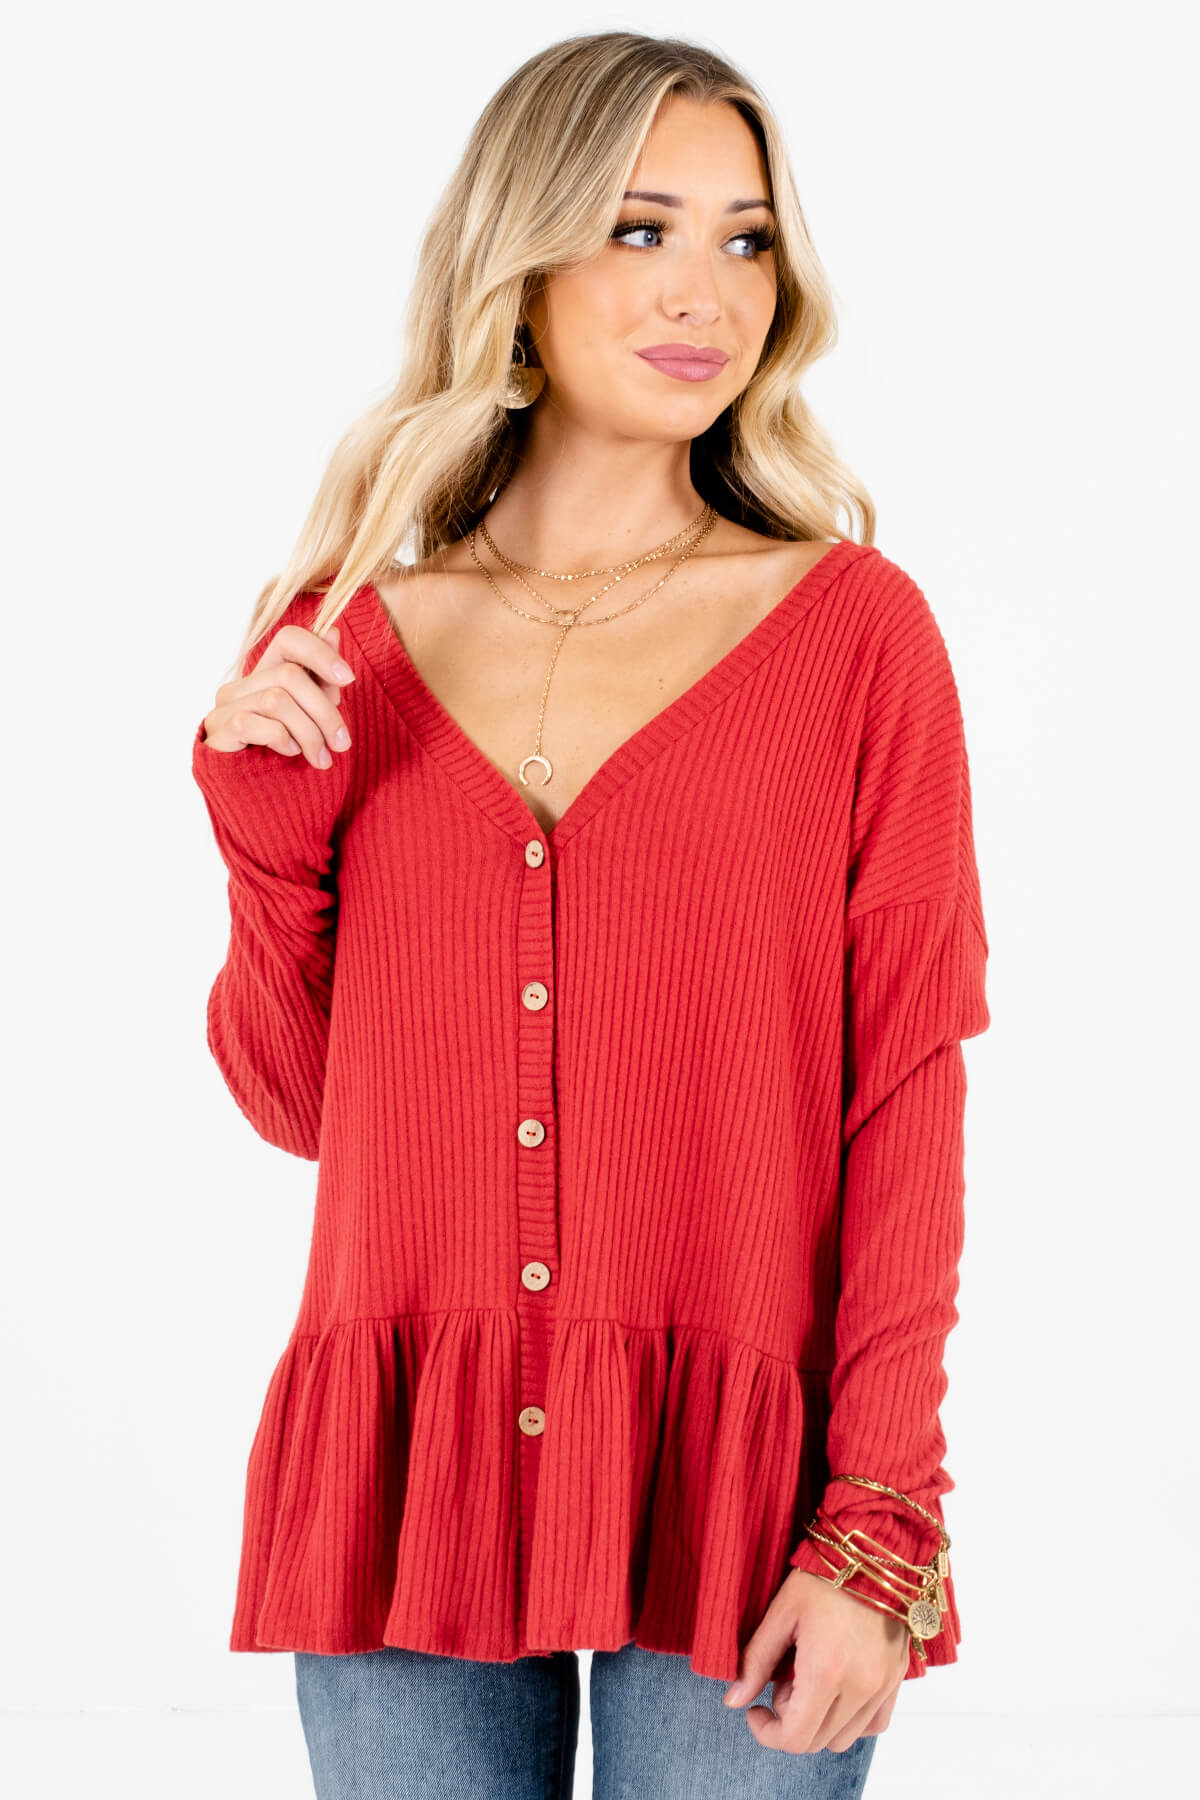 Women's Red Oversized Relaxed Fit Boutique Tops